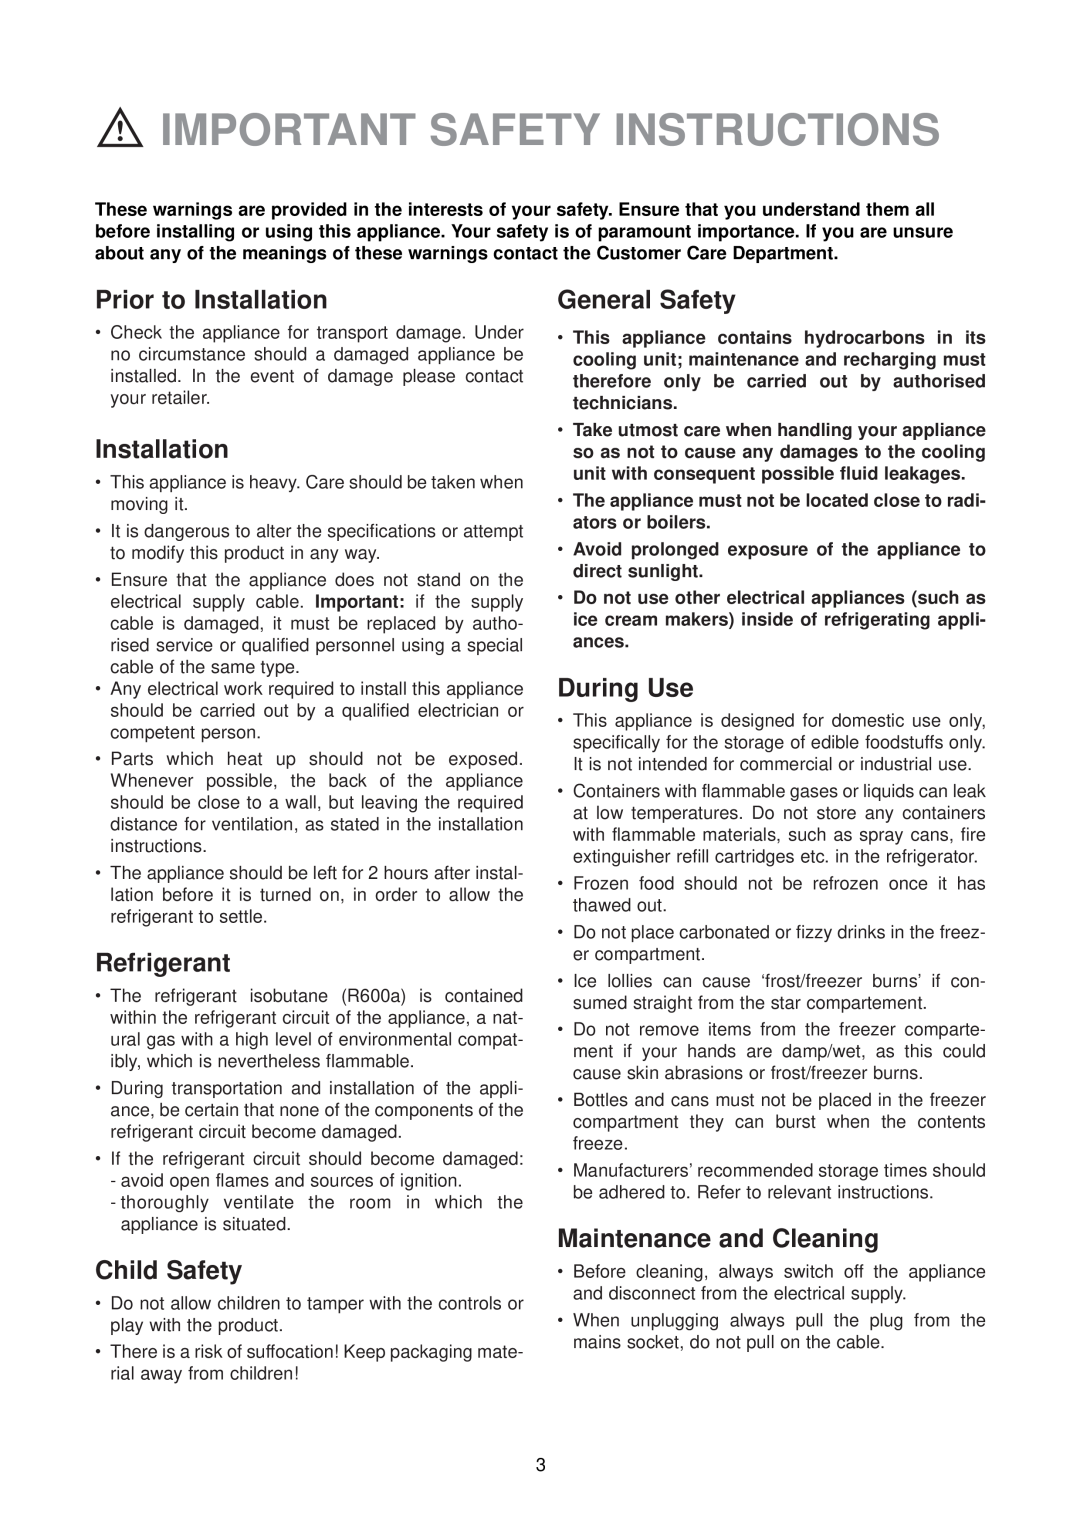 Electrolux EUU 6174 manual Important Safety Instructions, Prior to Installation, Refrigerant, Child Safety, General Safety 